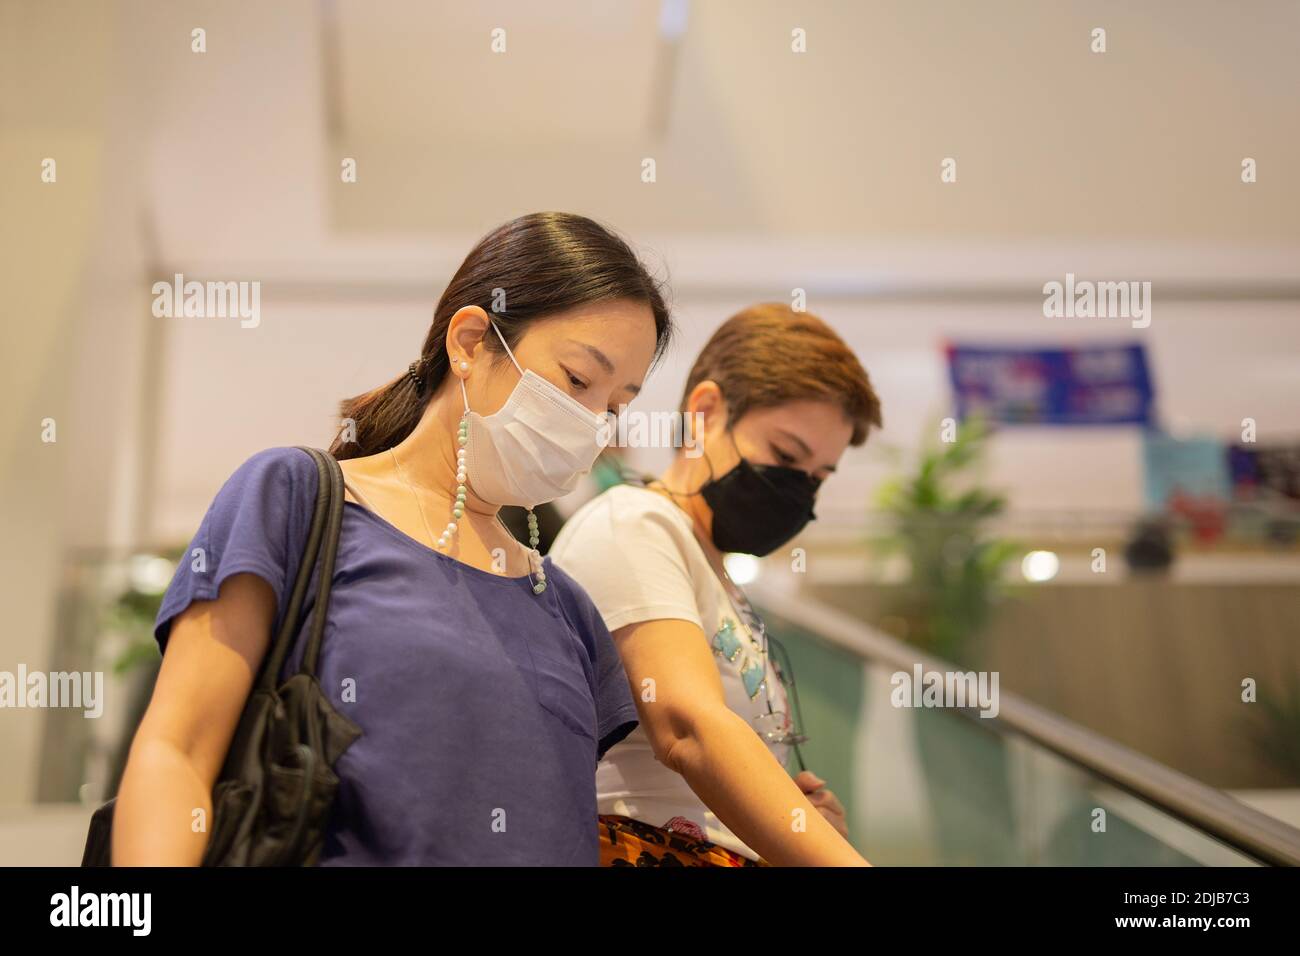 Asian women in protective mask standing on escalator in shopping mall. Stock Photo